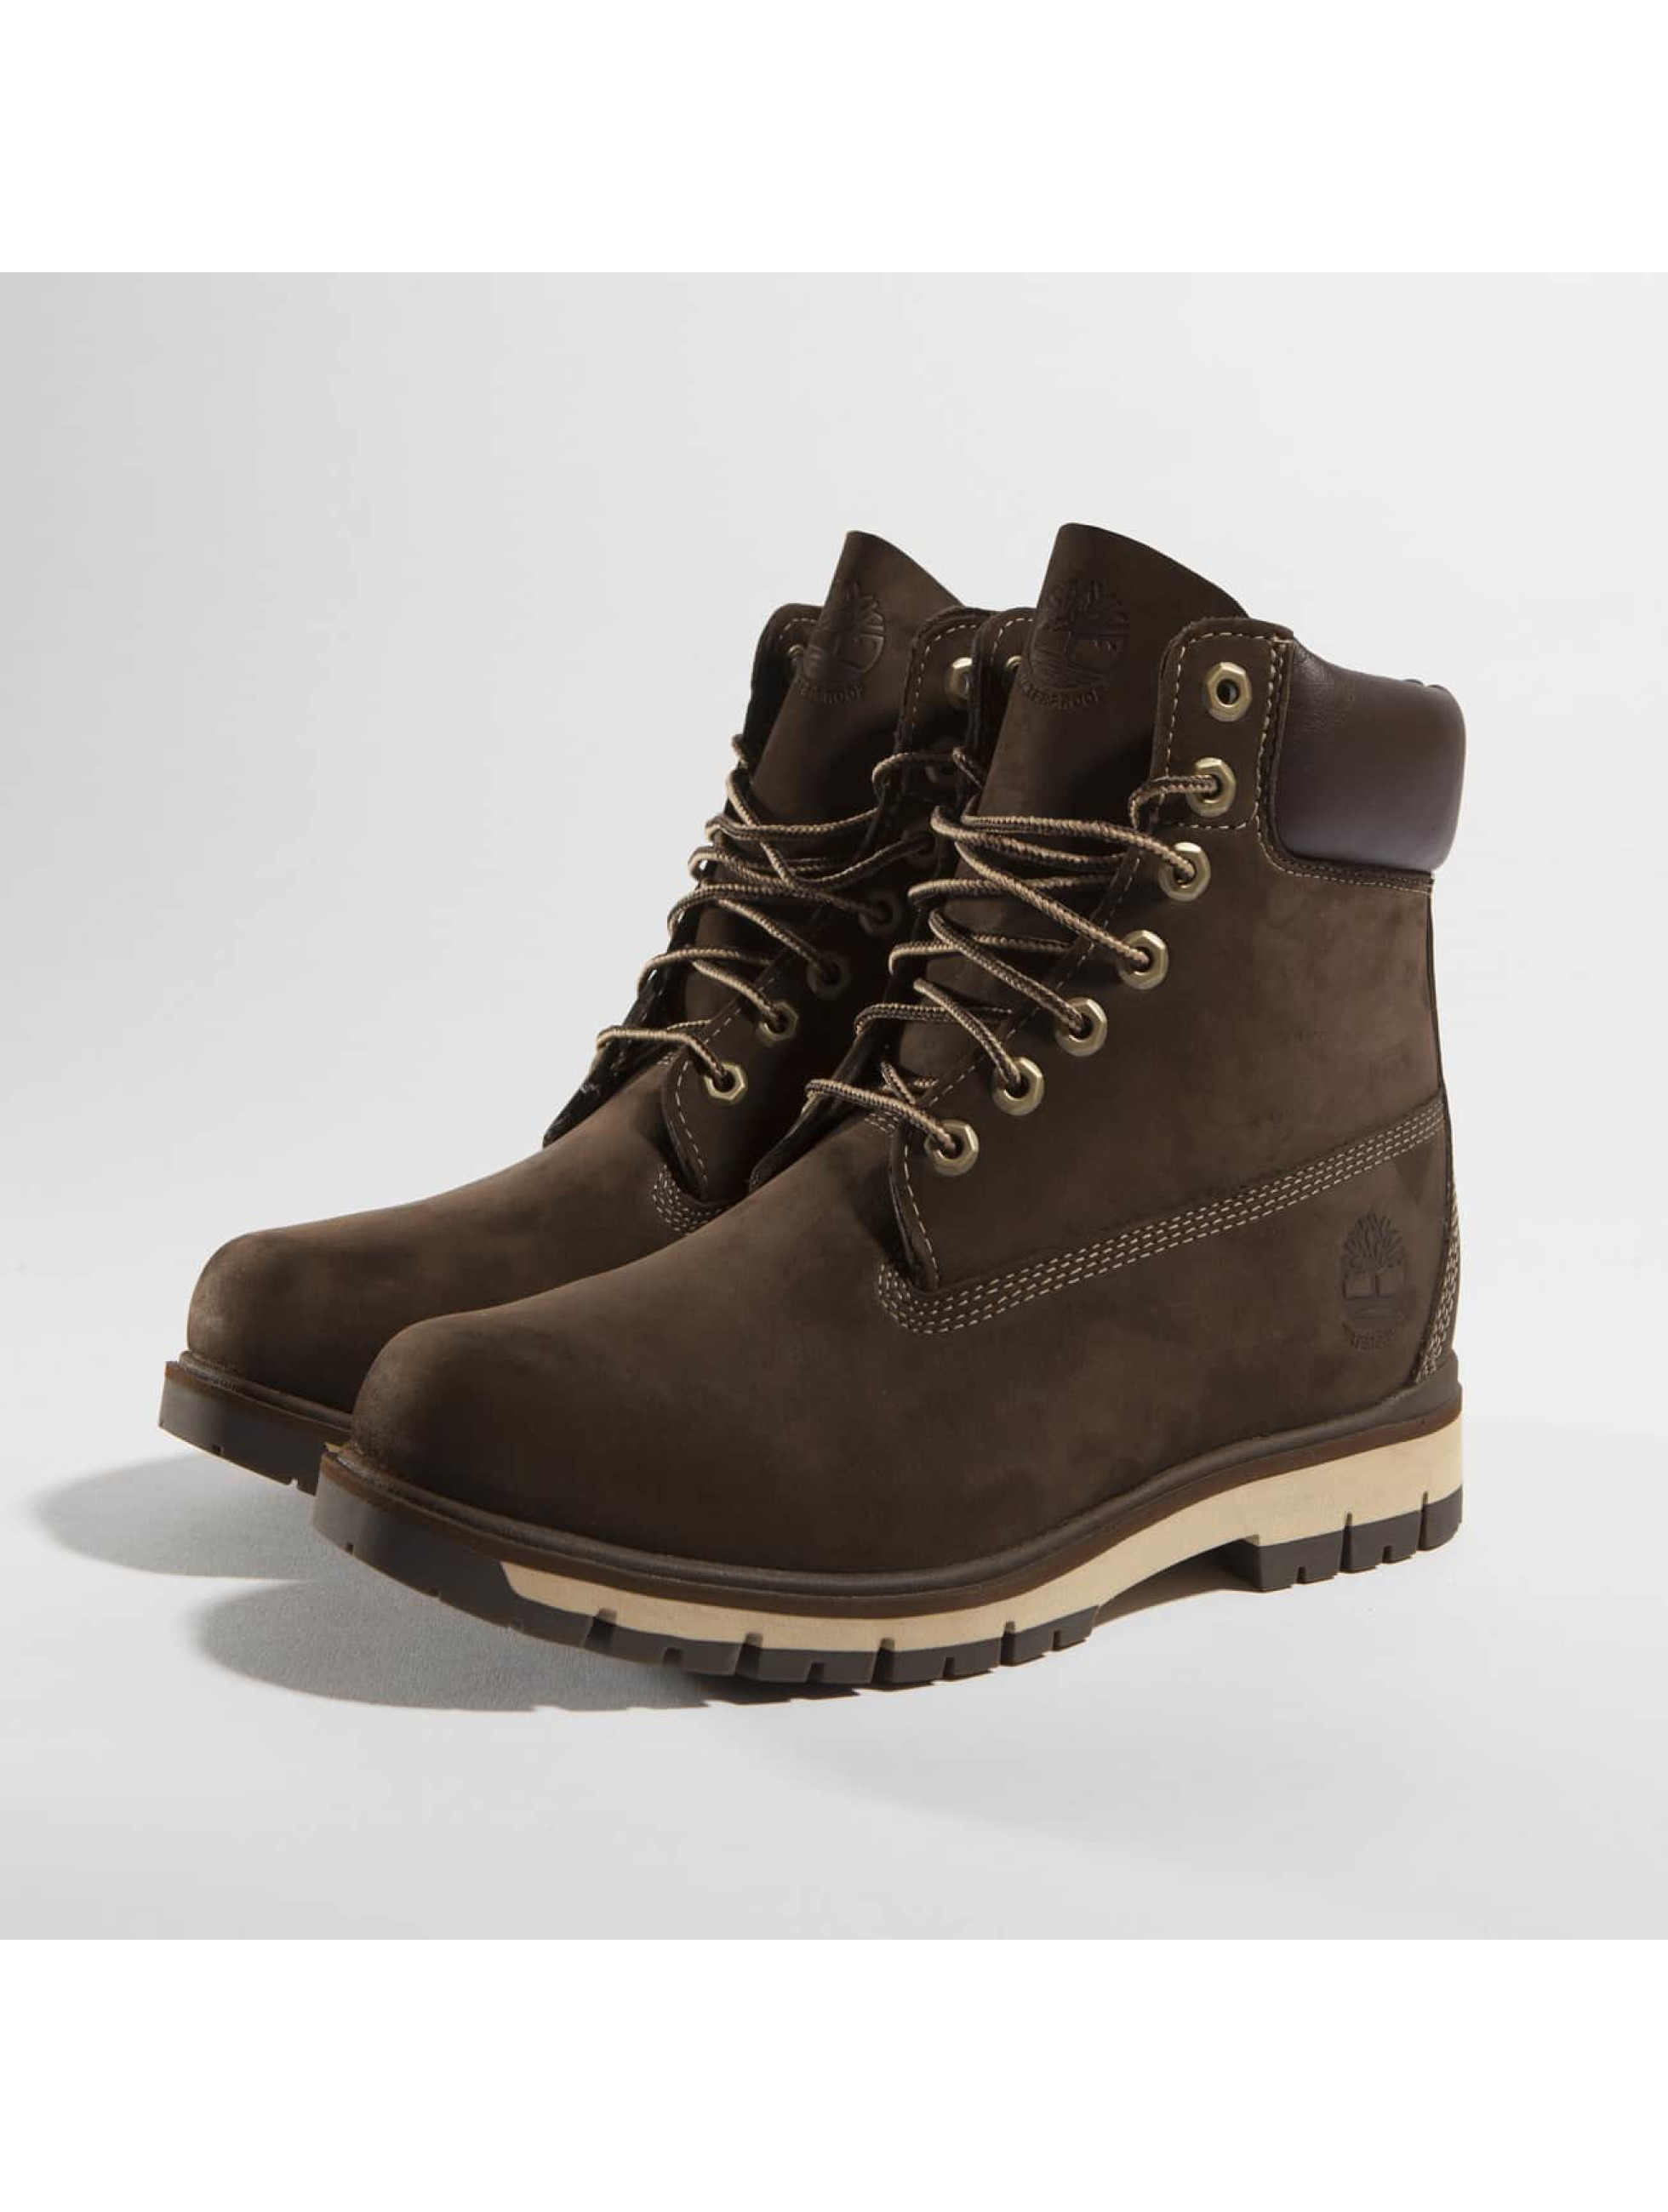 Timberland 6 Inch Waterproof brun Chaussures montantes homme